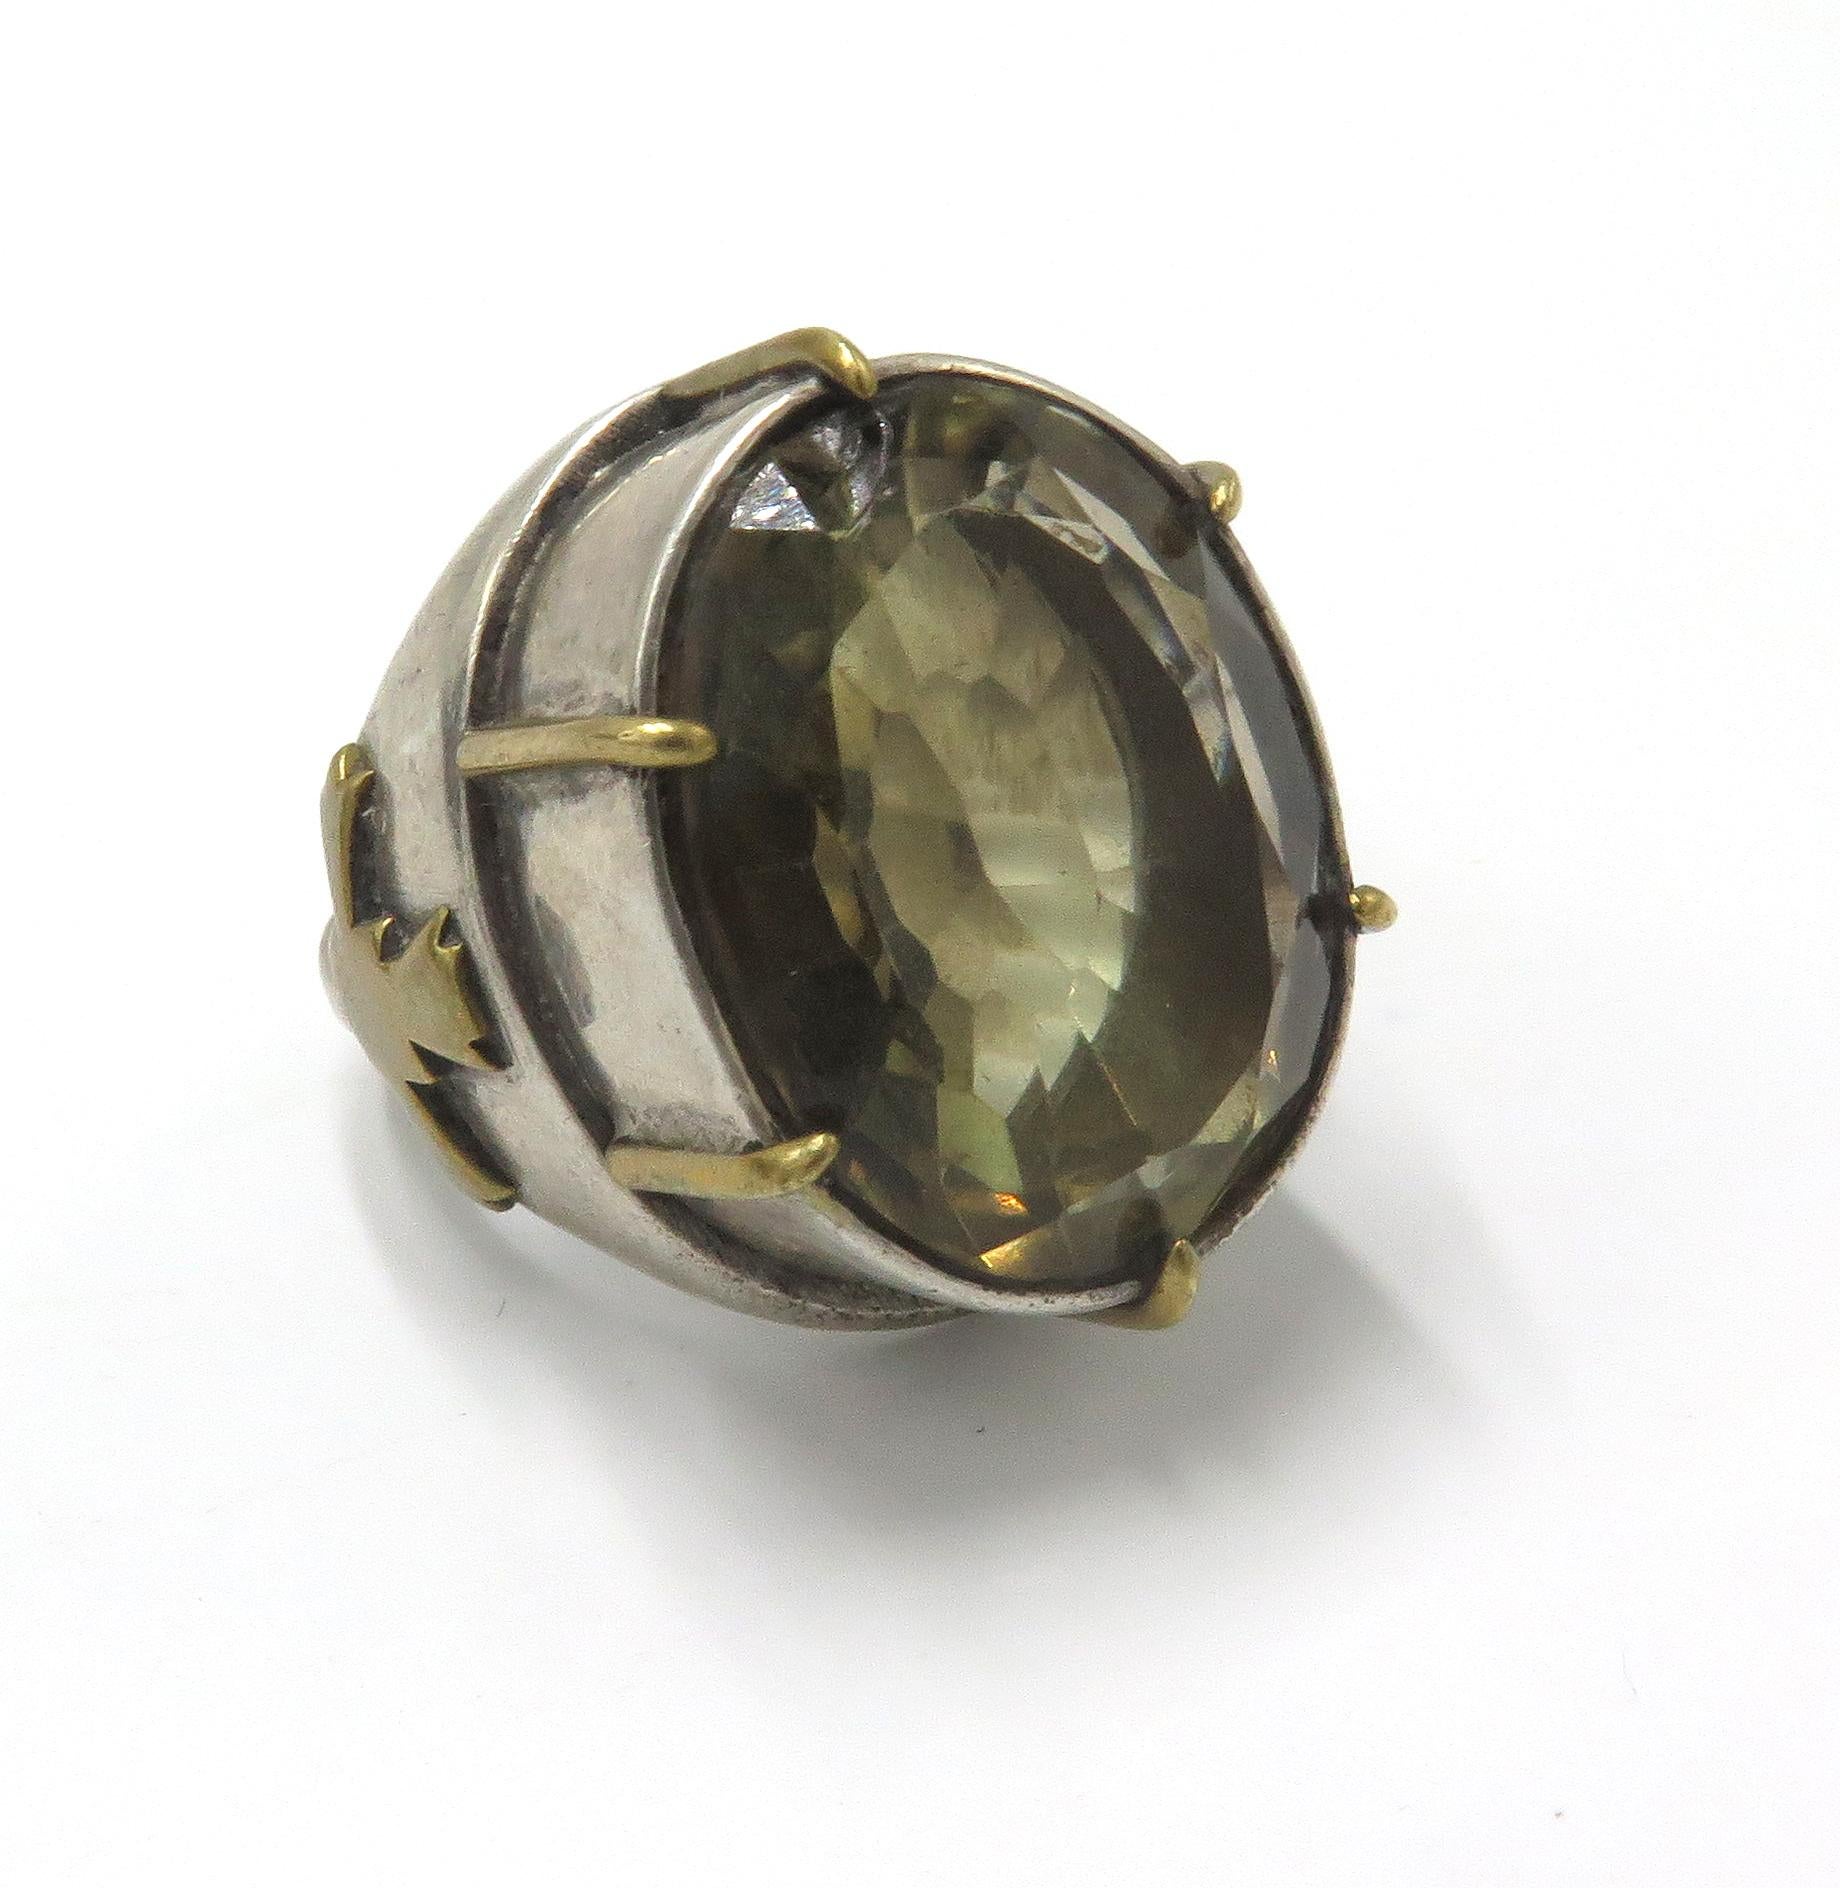 A, beautiful silver antique bishops rings. A, lovely bishops rings with beautiful gold accents and beautiful oval citrine. The, ring is crafted in silver but it include gold accents. On, the sides of each ring there a cross accent in gold. Around,